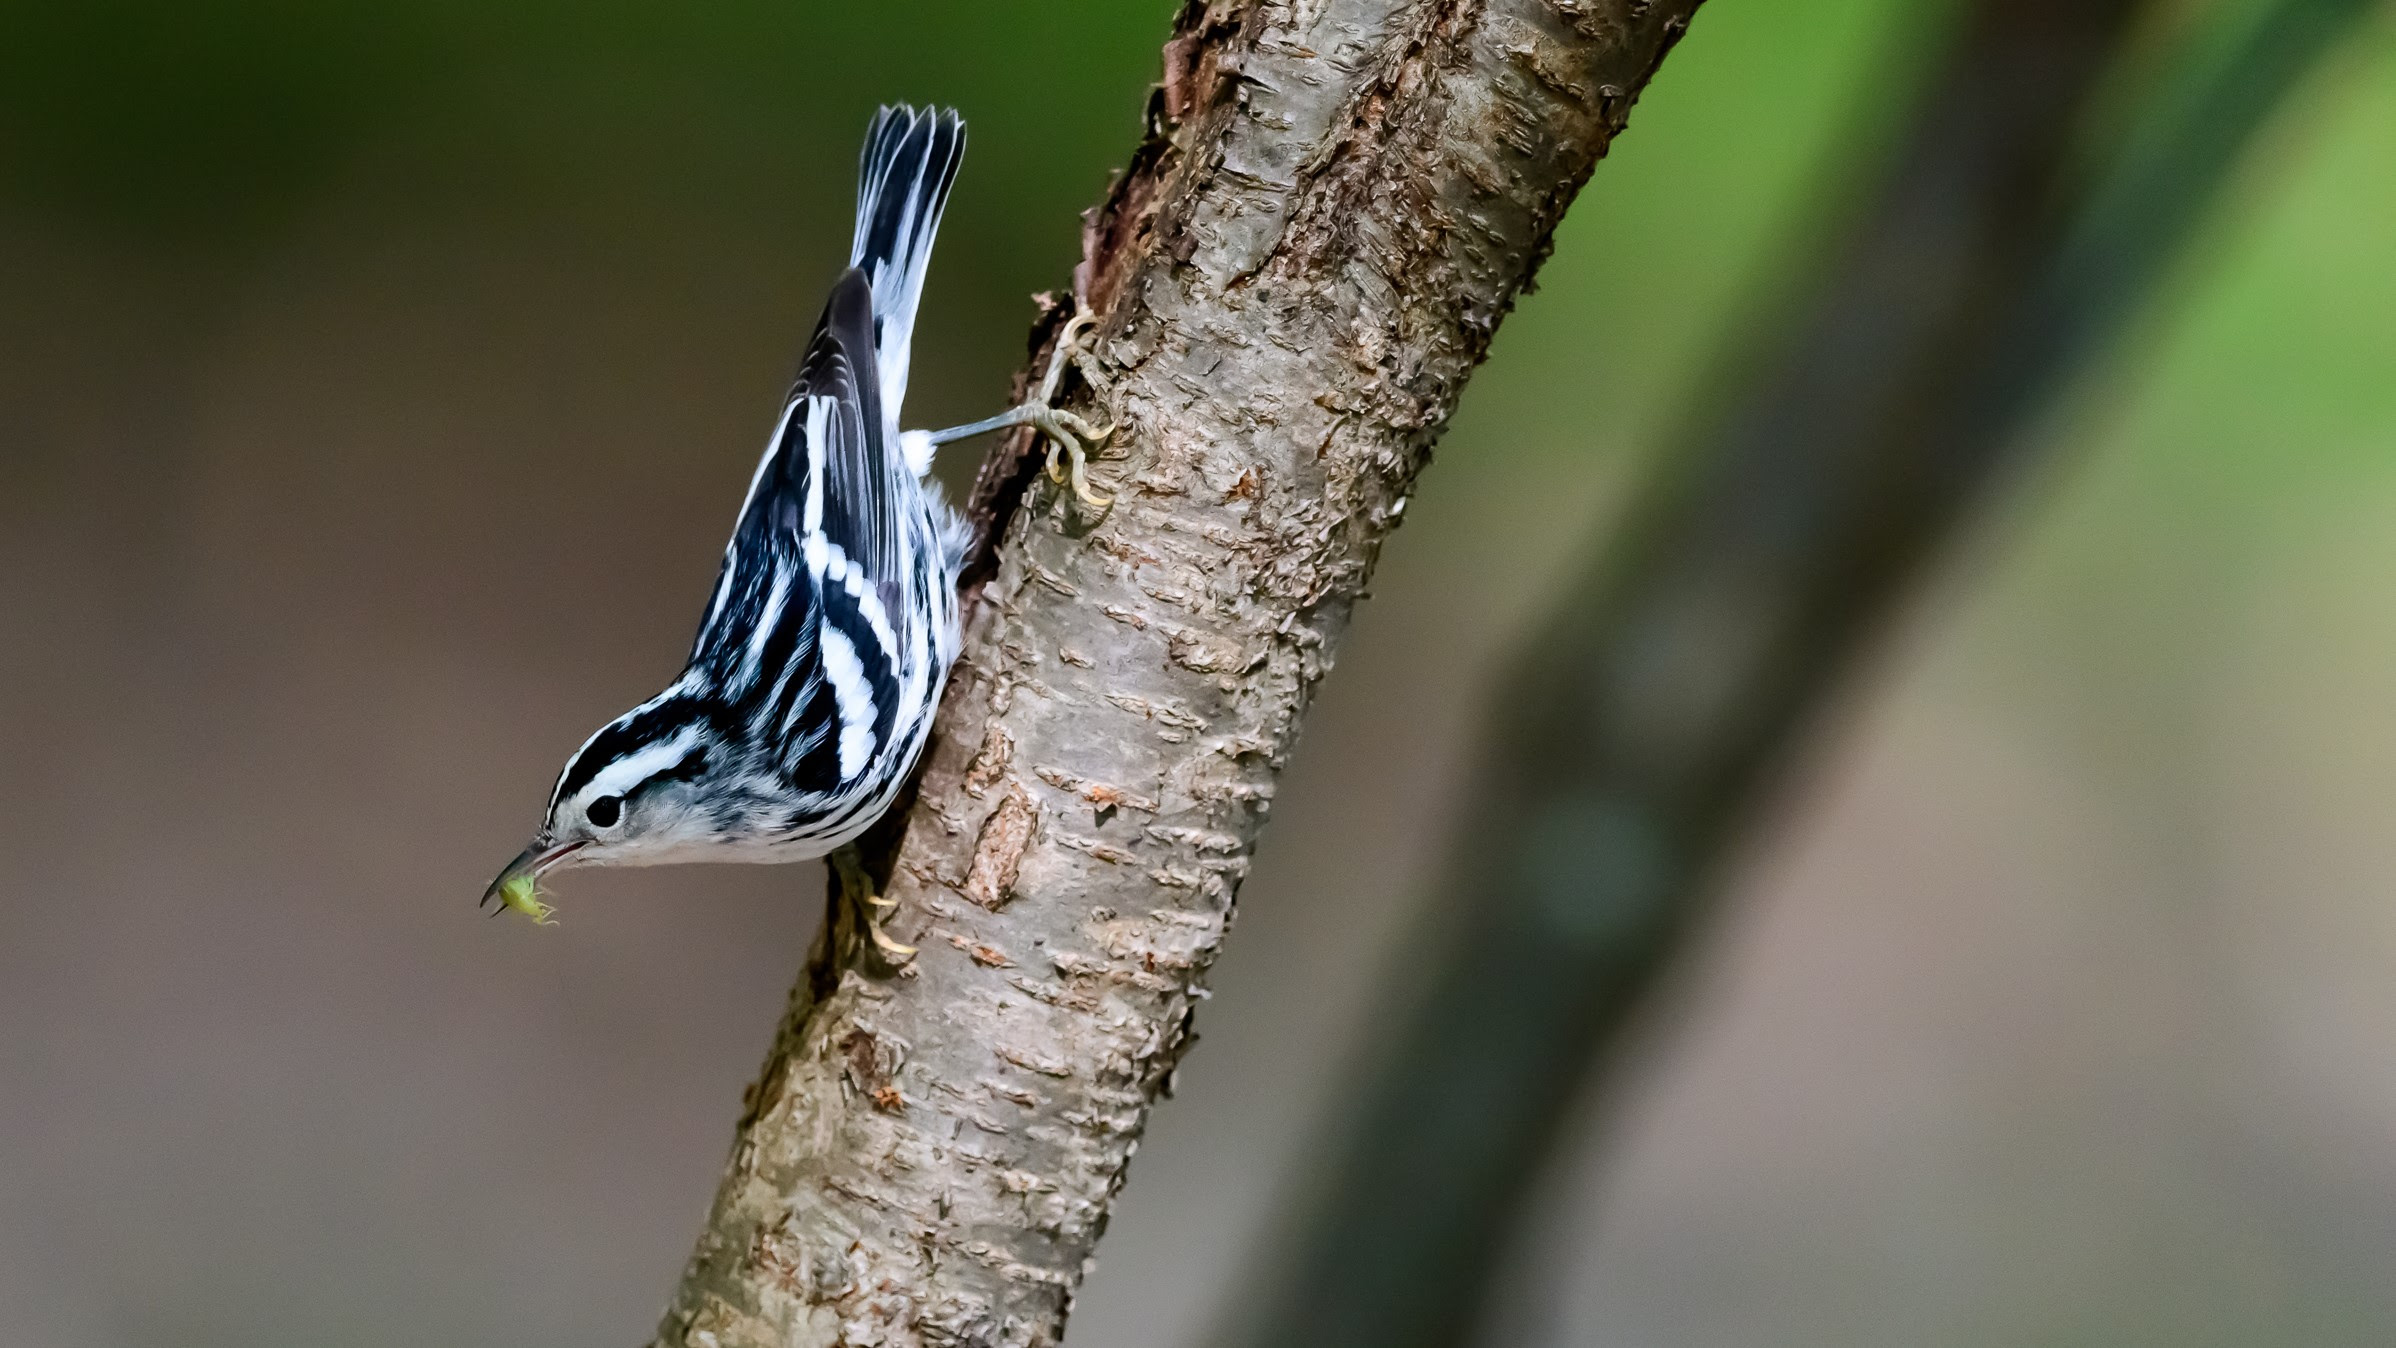 A black and white warbler crawls down a branch.